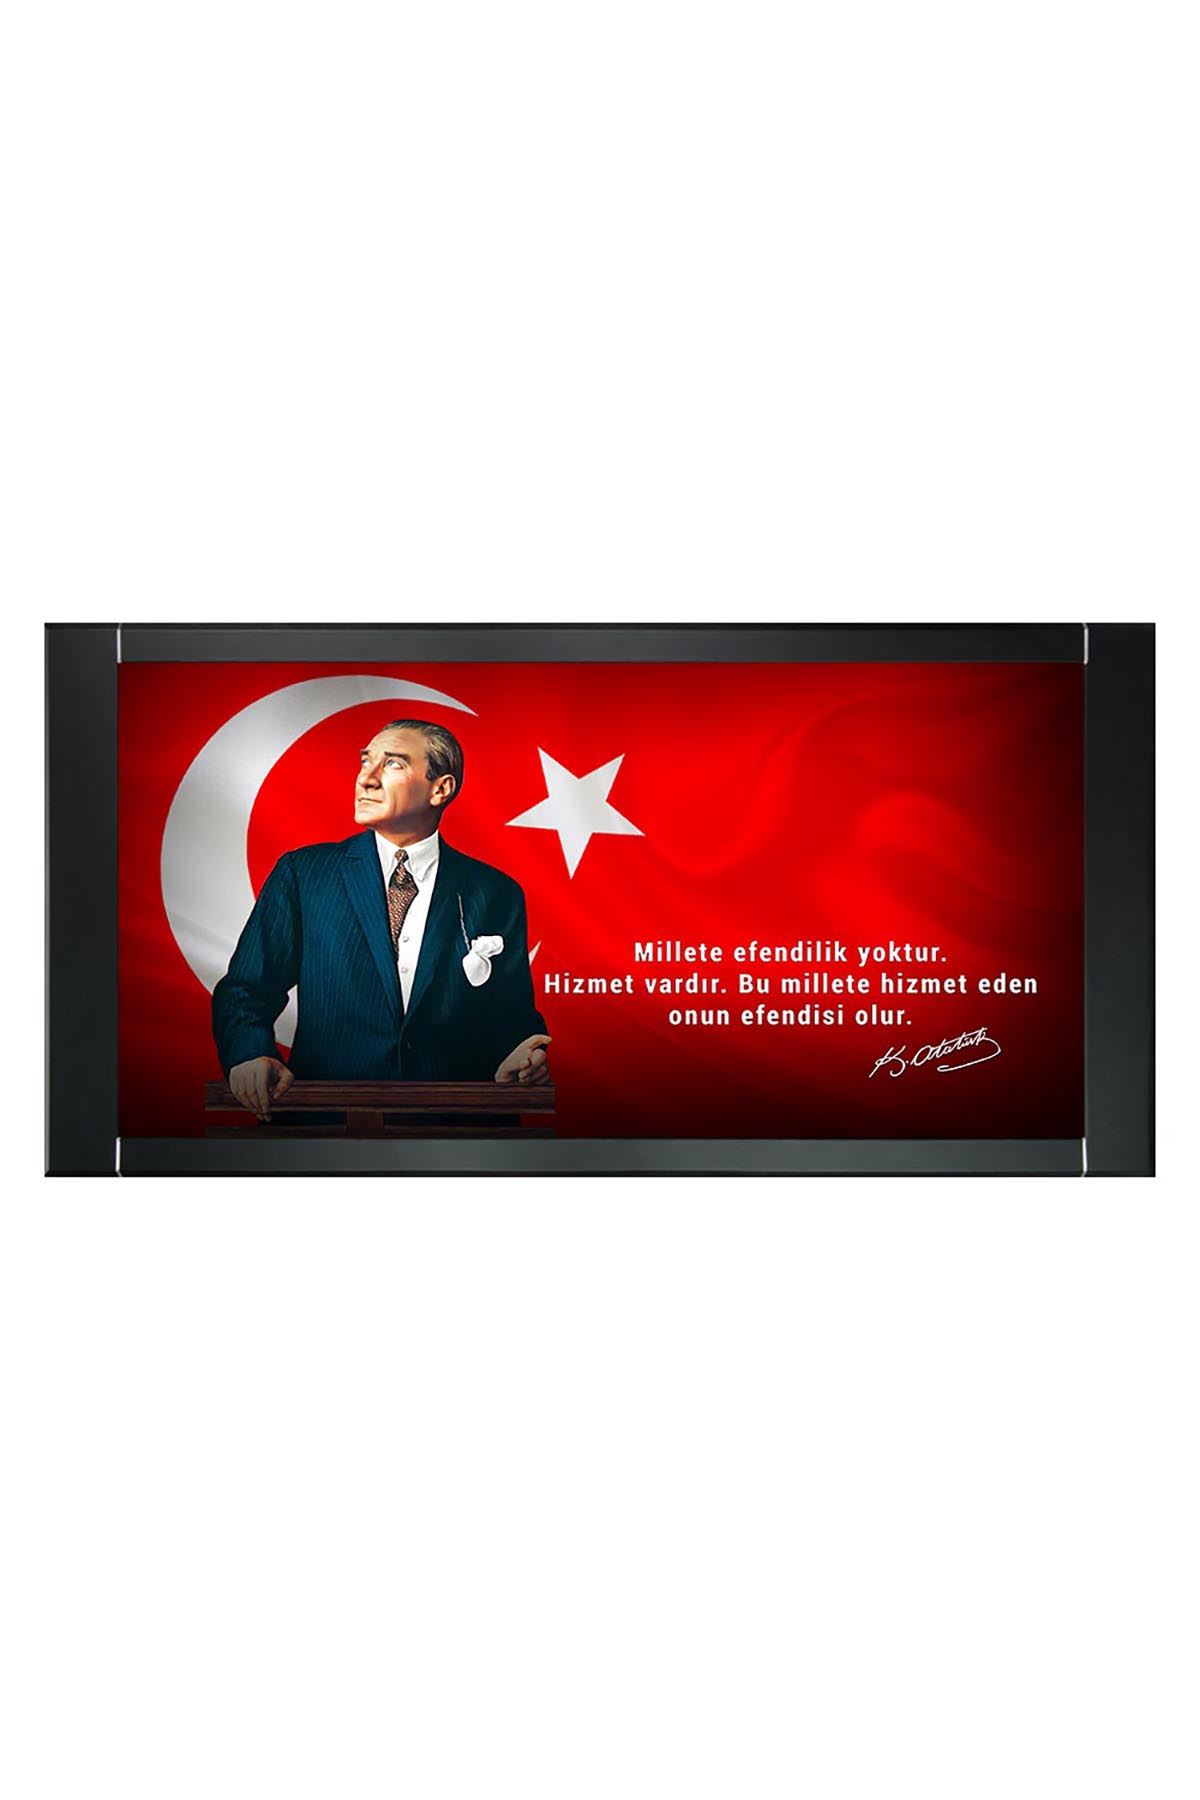 Atatürk Printed Manager Board | Printed Manager Board | Leather Framed Board | High Quality Manager Board  